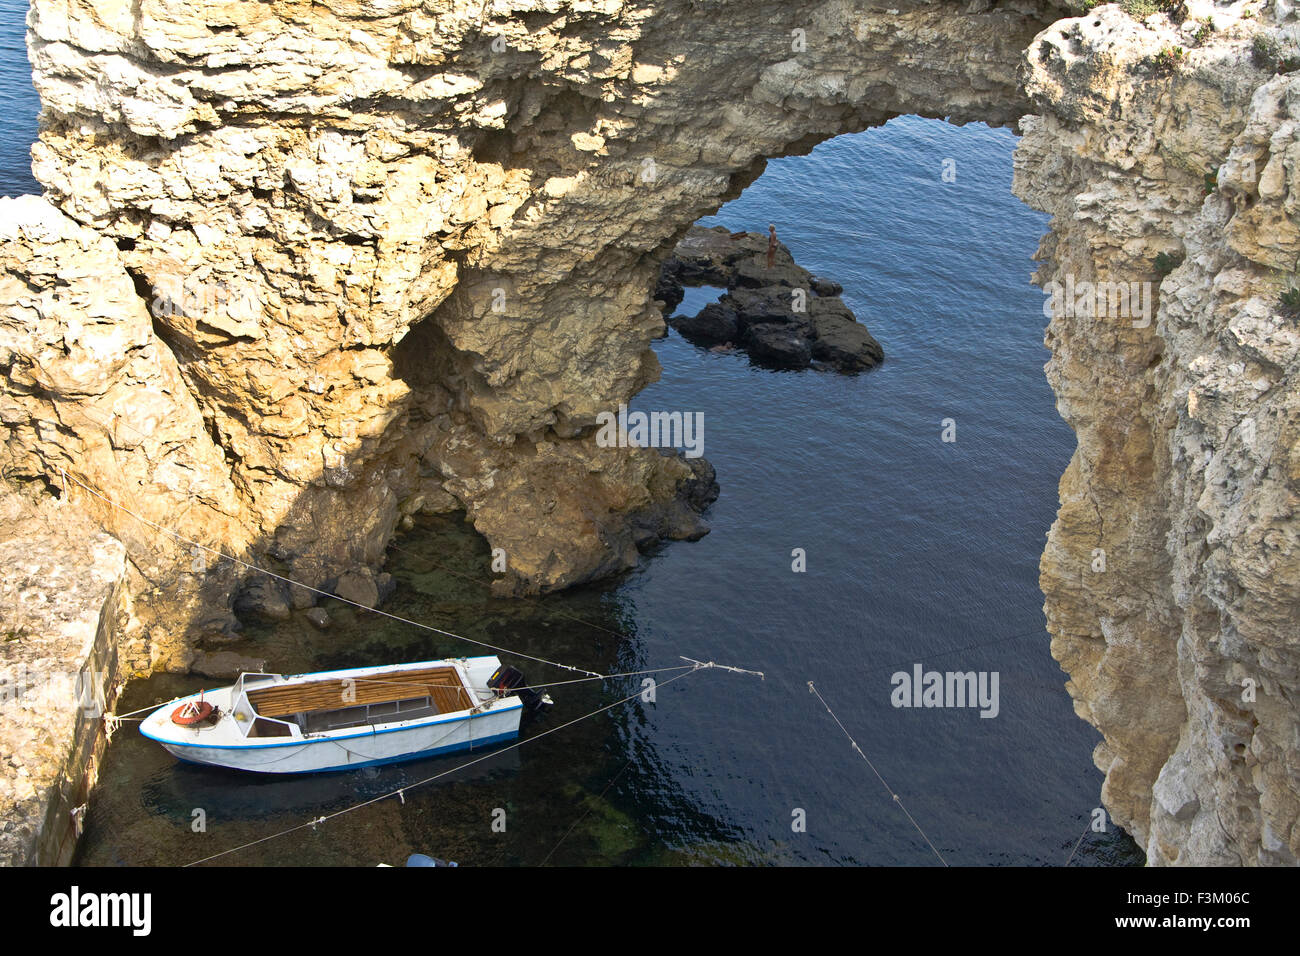 Sea landscape with rock and boat, recorded in place Tarhankut in region Crimea on Black sea. Stock Photo